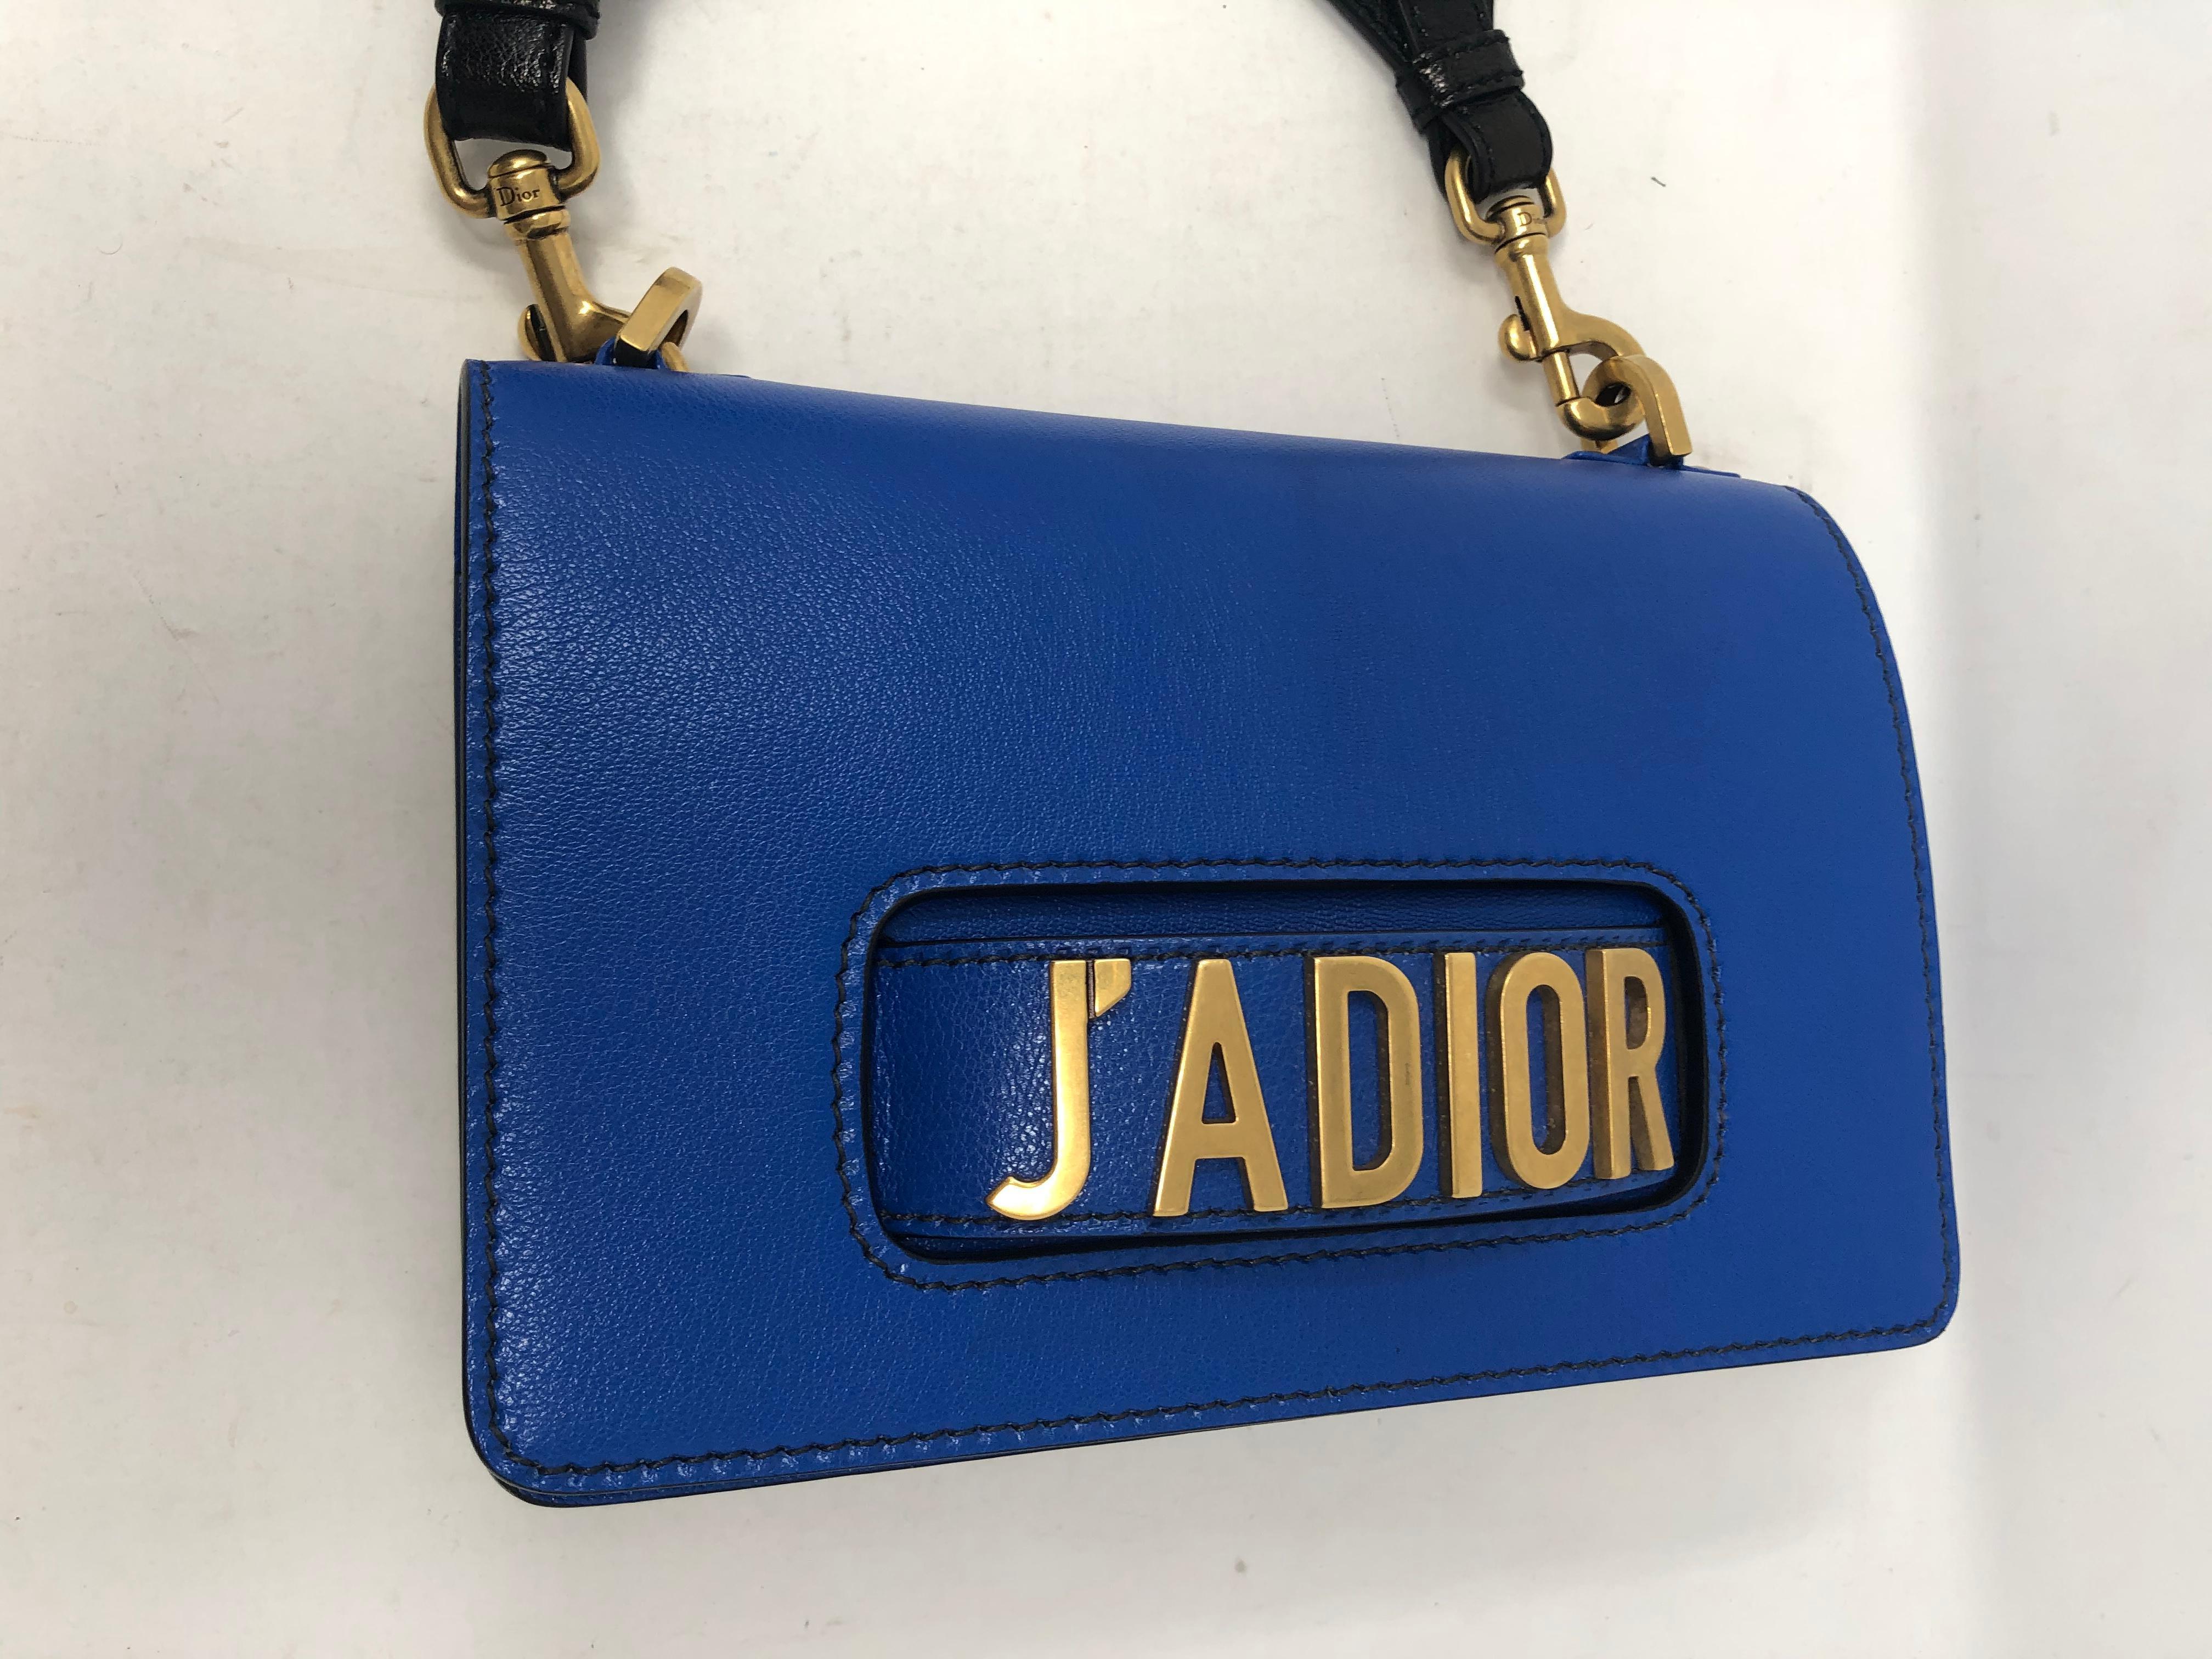 Christian Dior J'adior Blue leather bag with aztec style Dior strap. Rare combination. Strap can be detached and worn for other bags. Blue leather bag can be worn as clutch too. Brand new condition. Guaranteed authentic. 